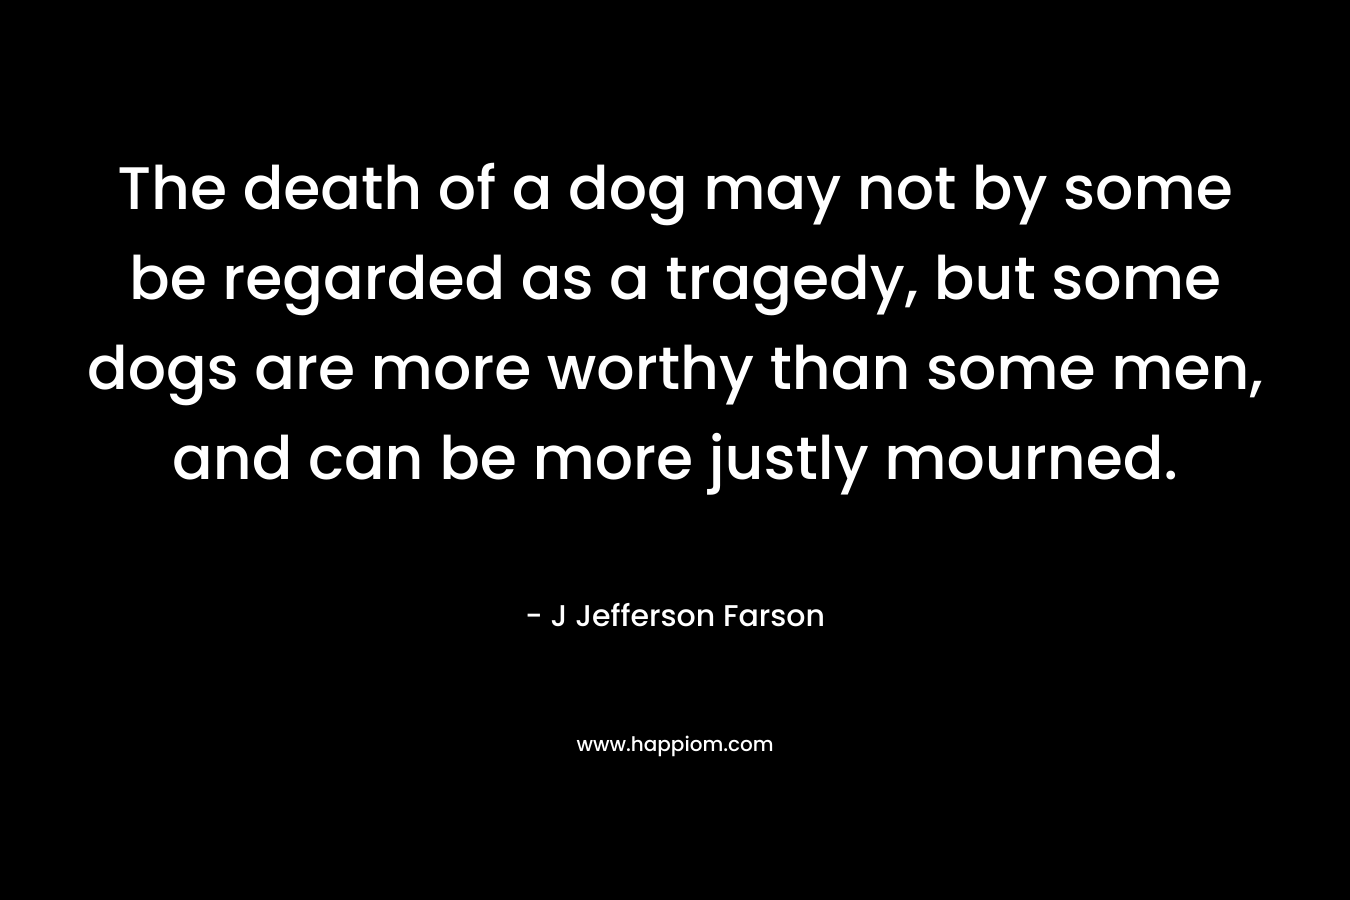 The death of a dog may not by some be regarded as a tragedy, but some dogs are more worthy than some men, and can be more justly mourned. – J Jefferson Farson